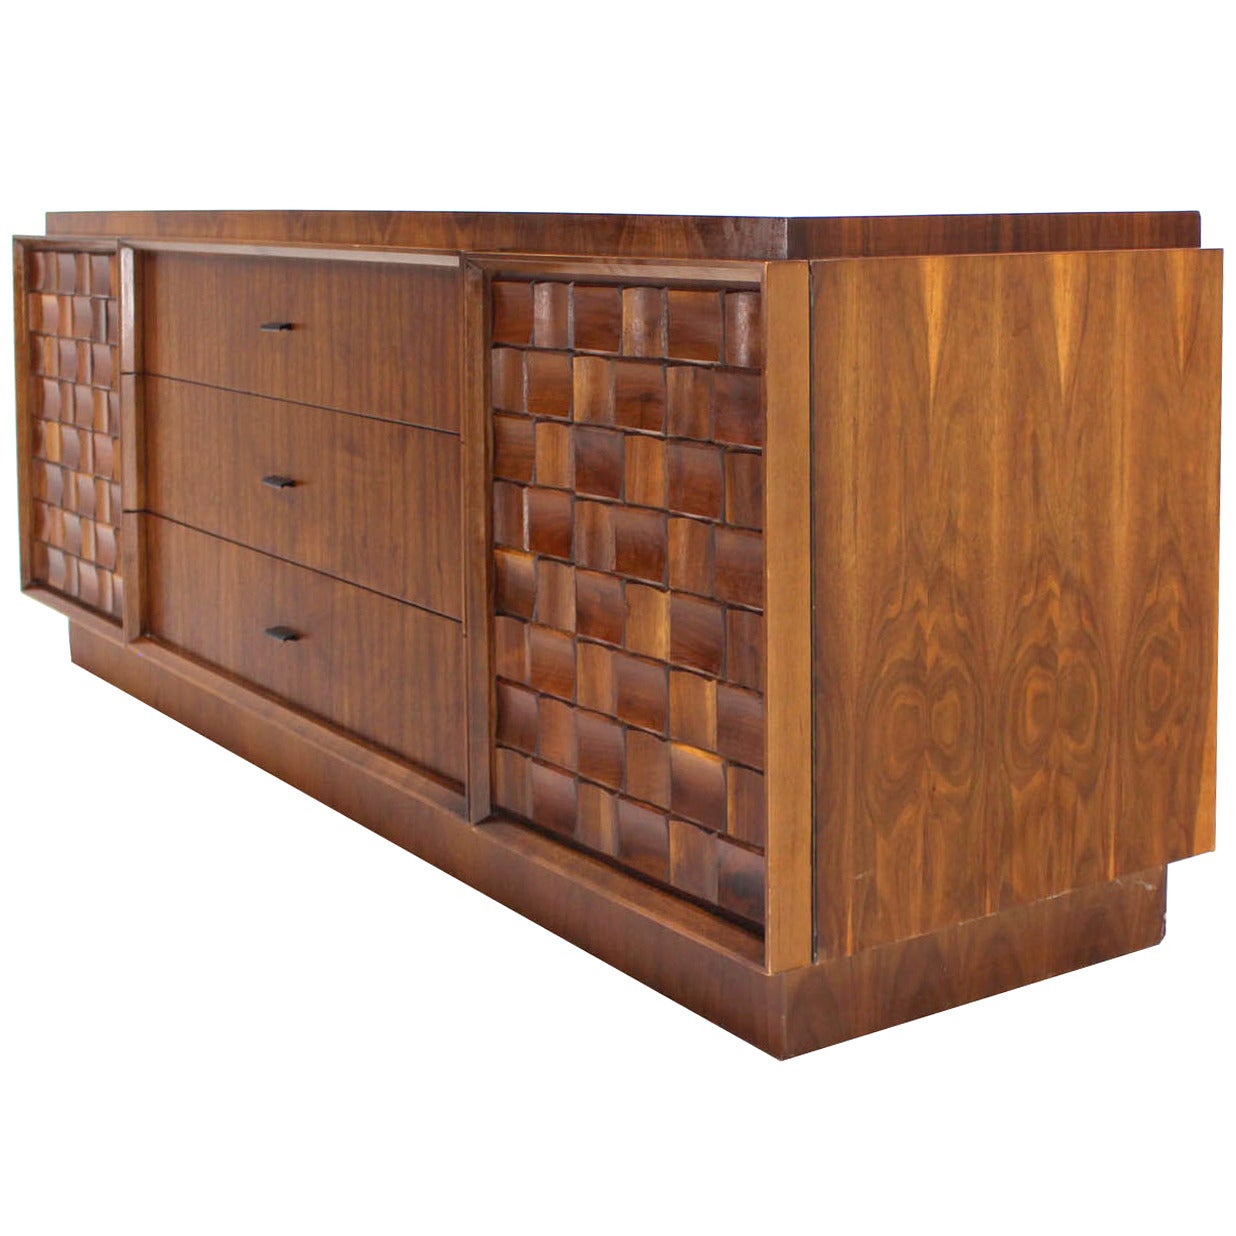 Walnut Credenza with Carved Basket Weave Pattern Doors